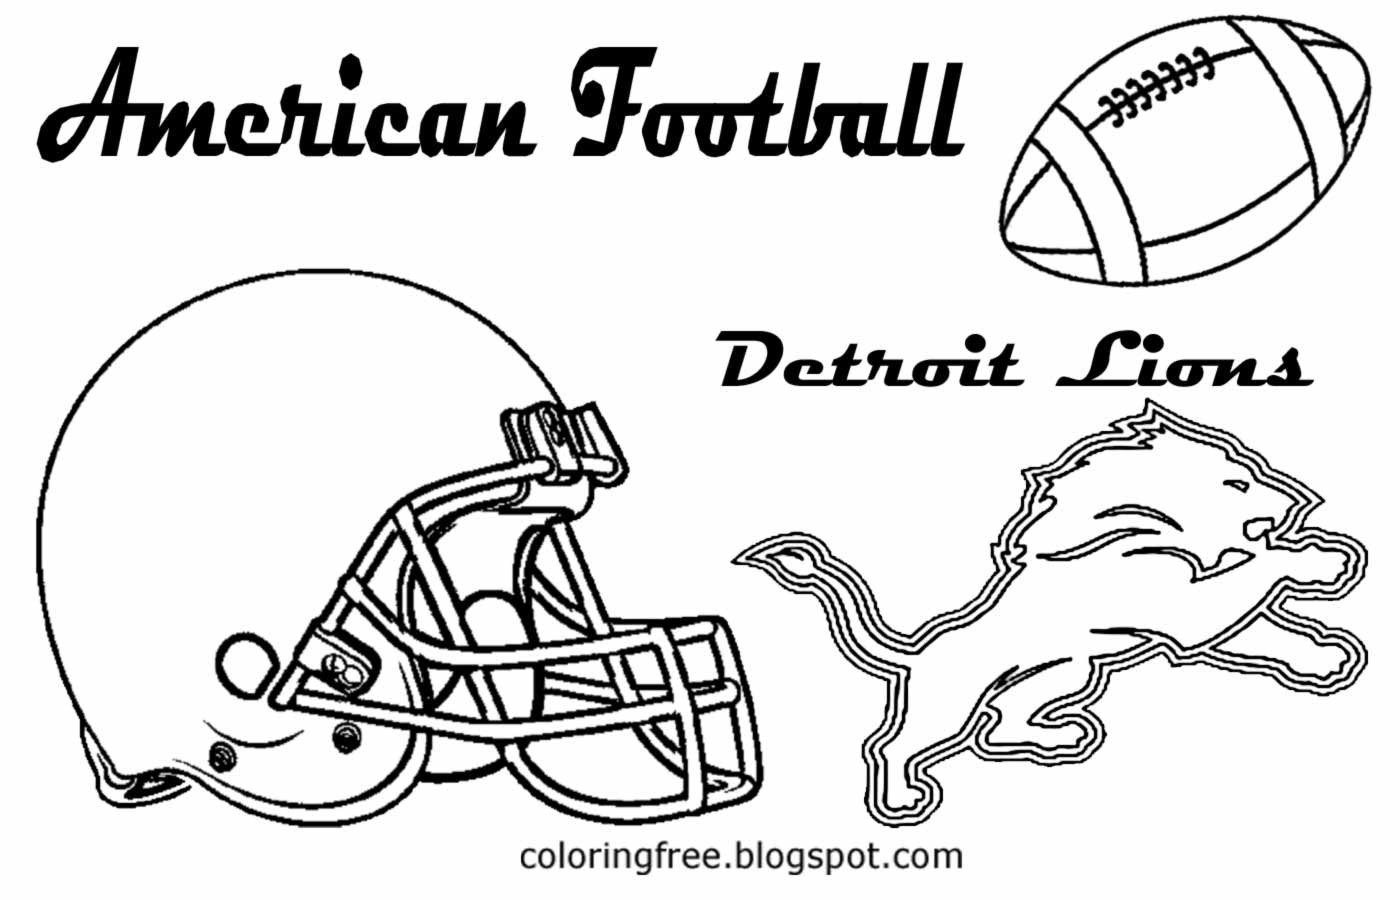 Coloring Pages For Boys Football Teams
 Calvin Johnson Football Coloring Pages Coloring Pages